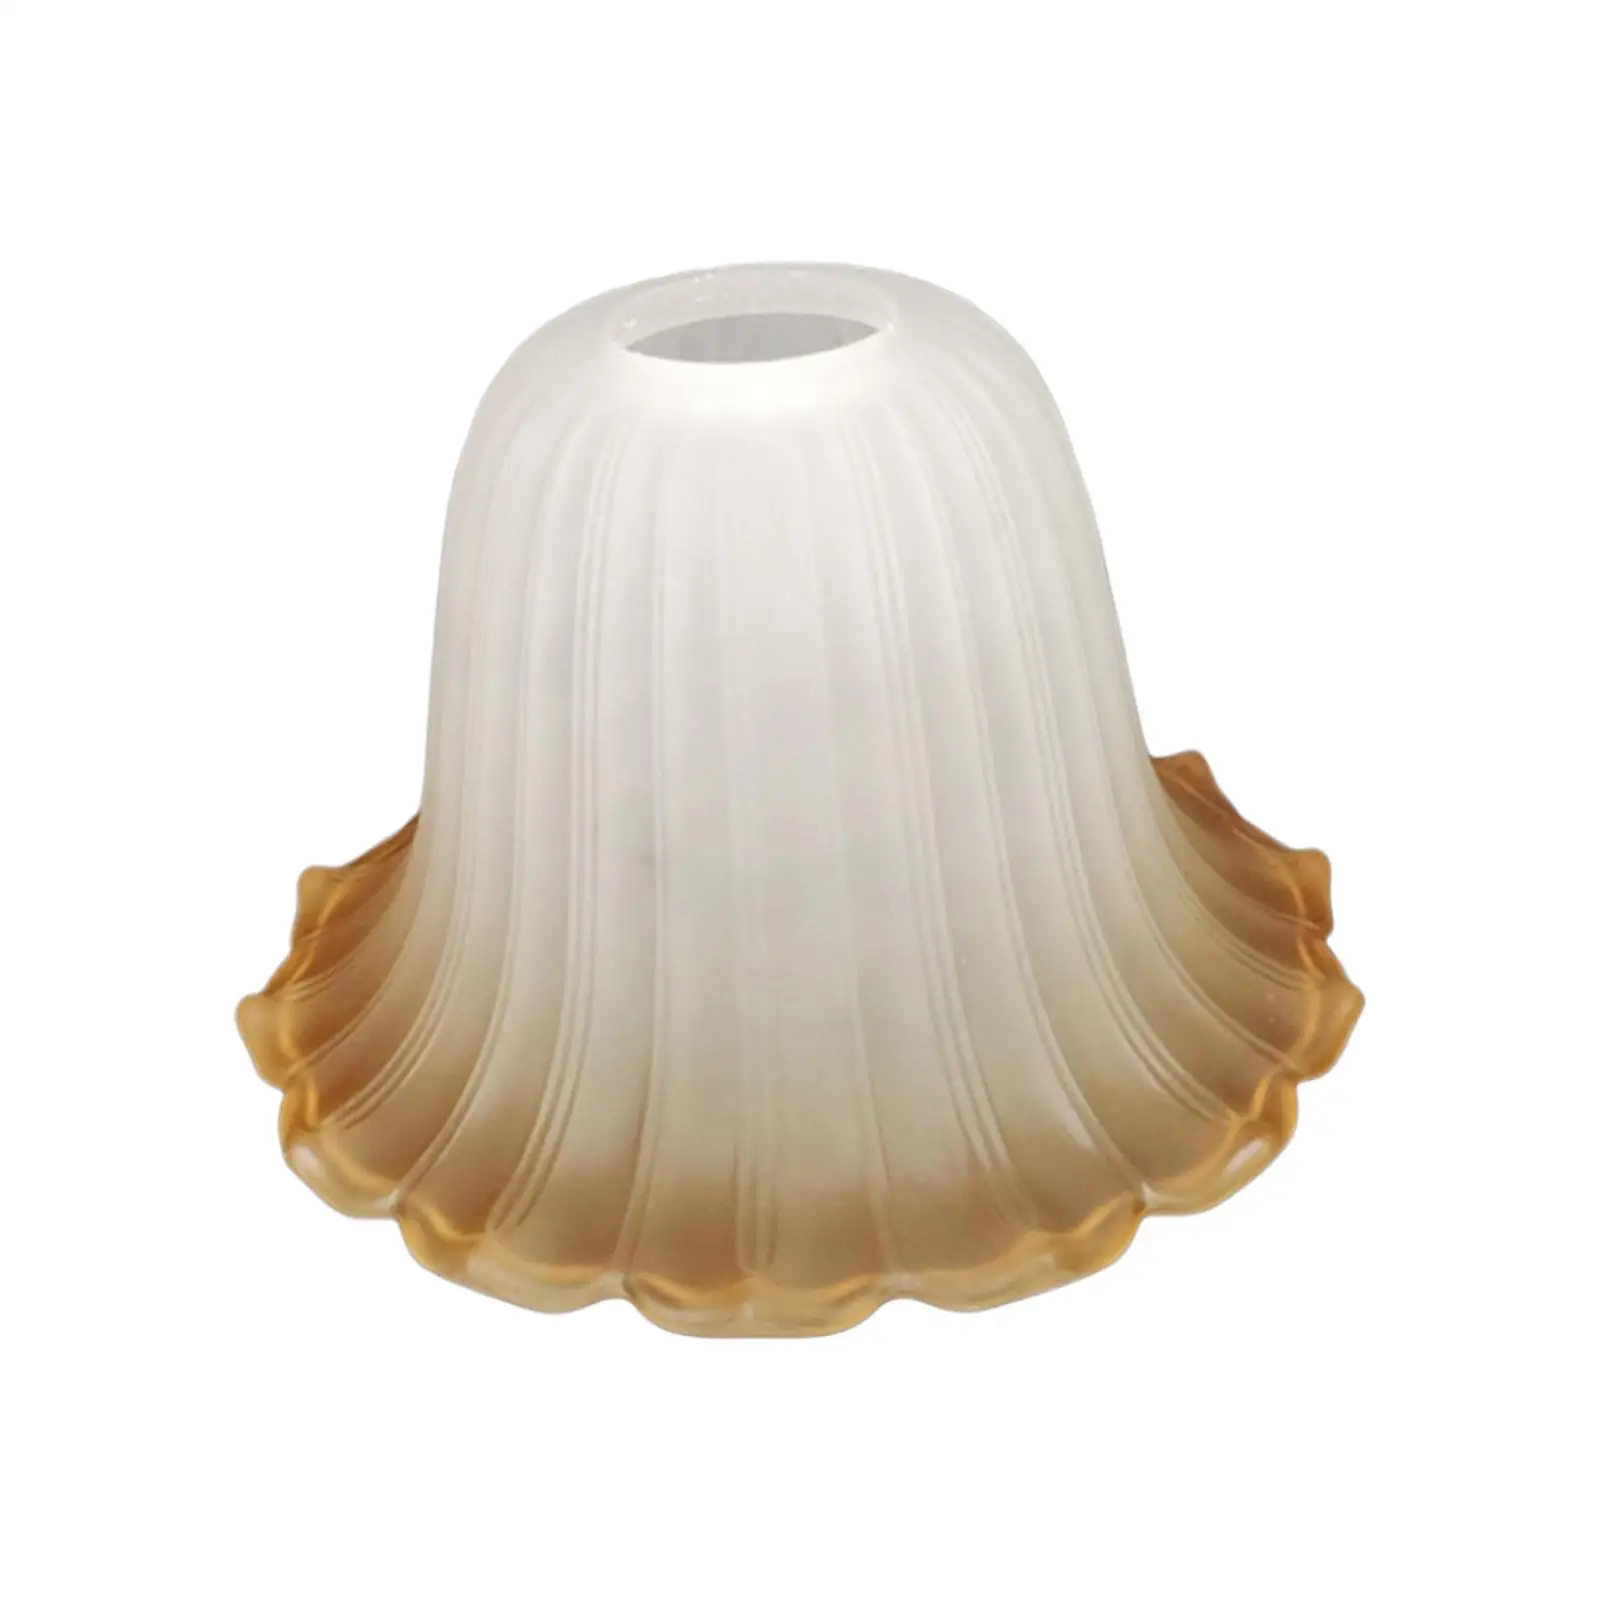 Modern Lamp Shade Replacement ,Glass Ceiling Light Shade, Chandelier Shades Light Cover for Sconces